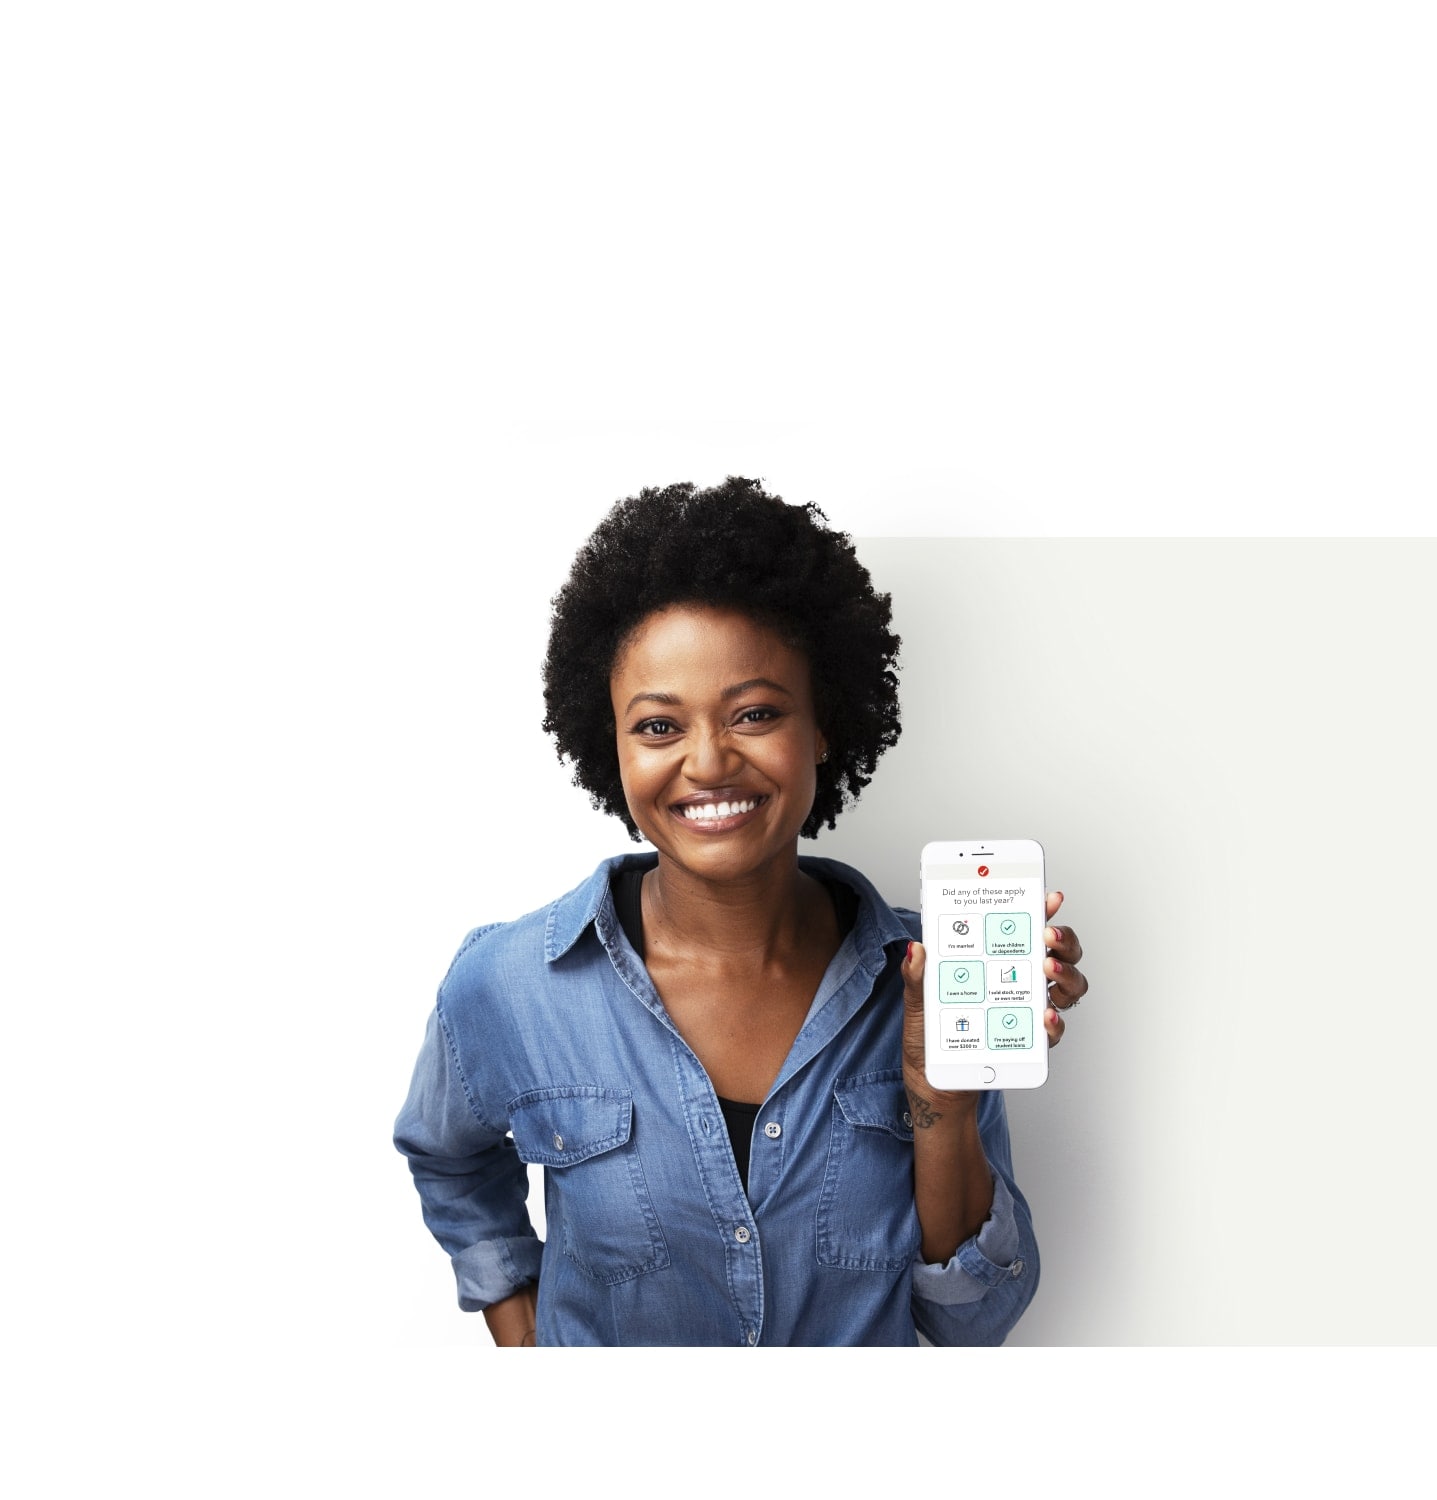 A woman is smiling and excited while holding her phone with a graphic of TurboTax software.